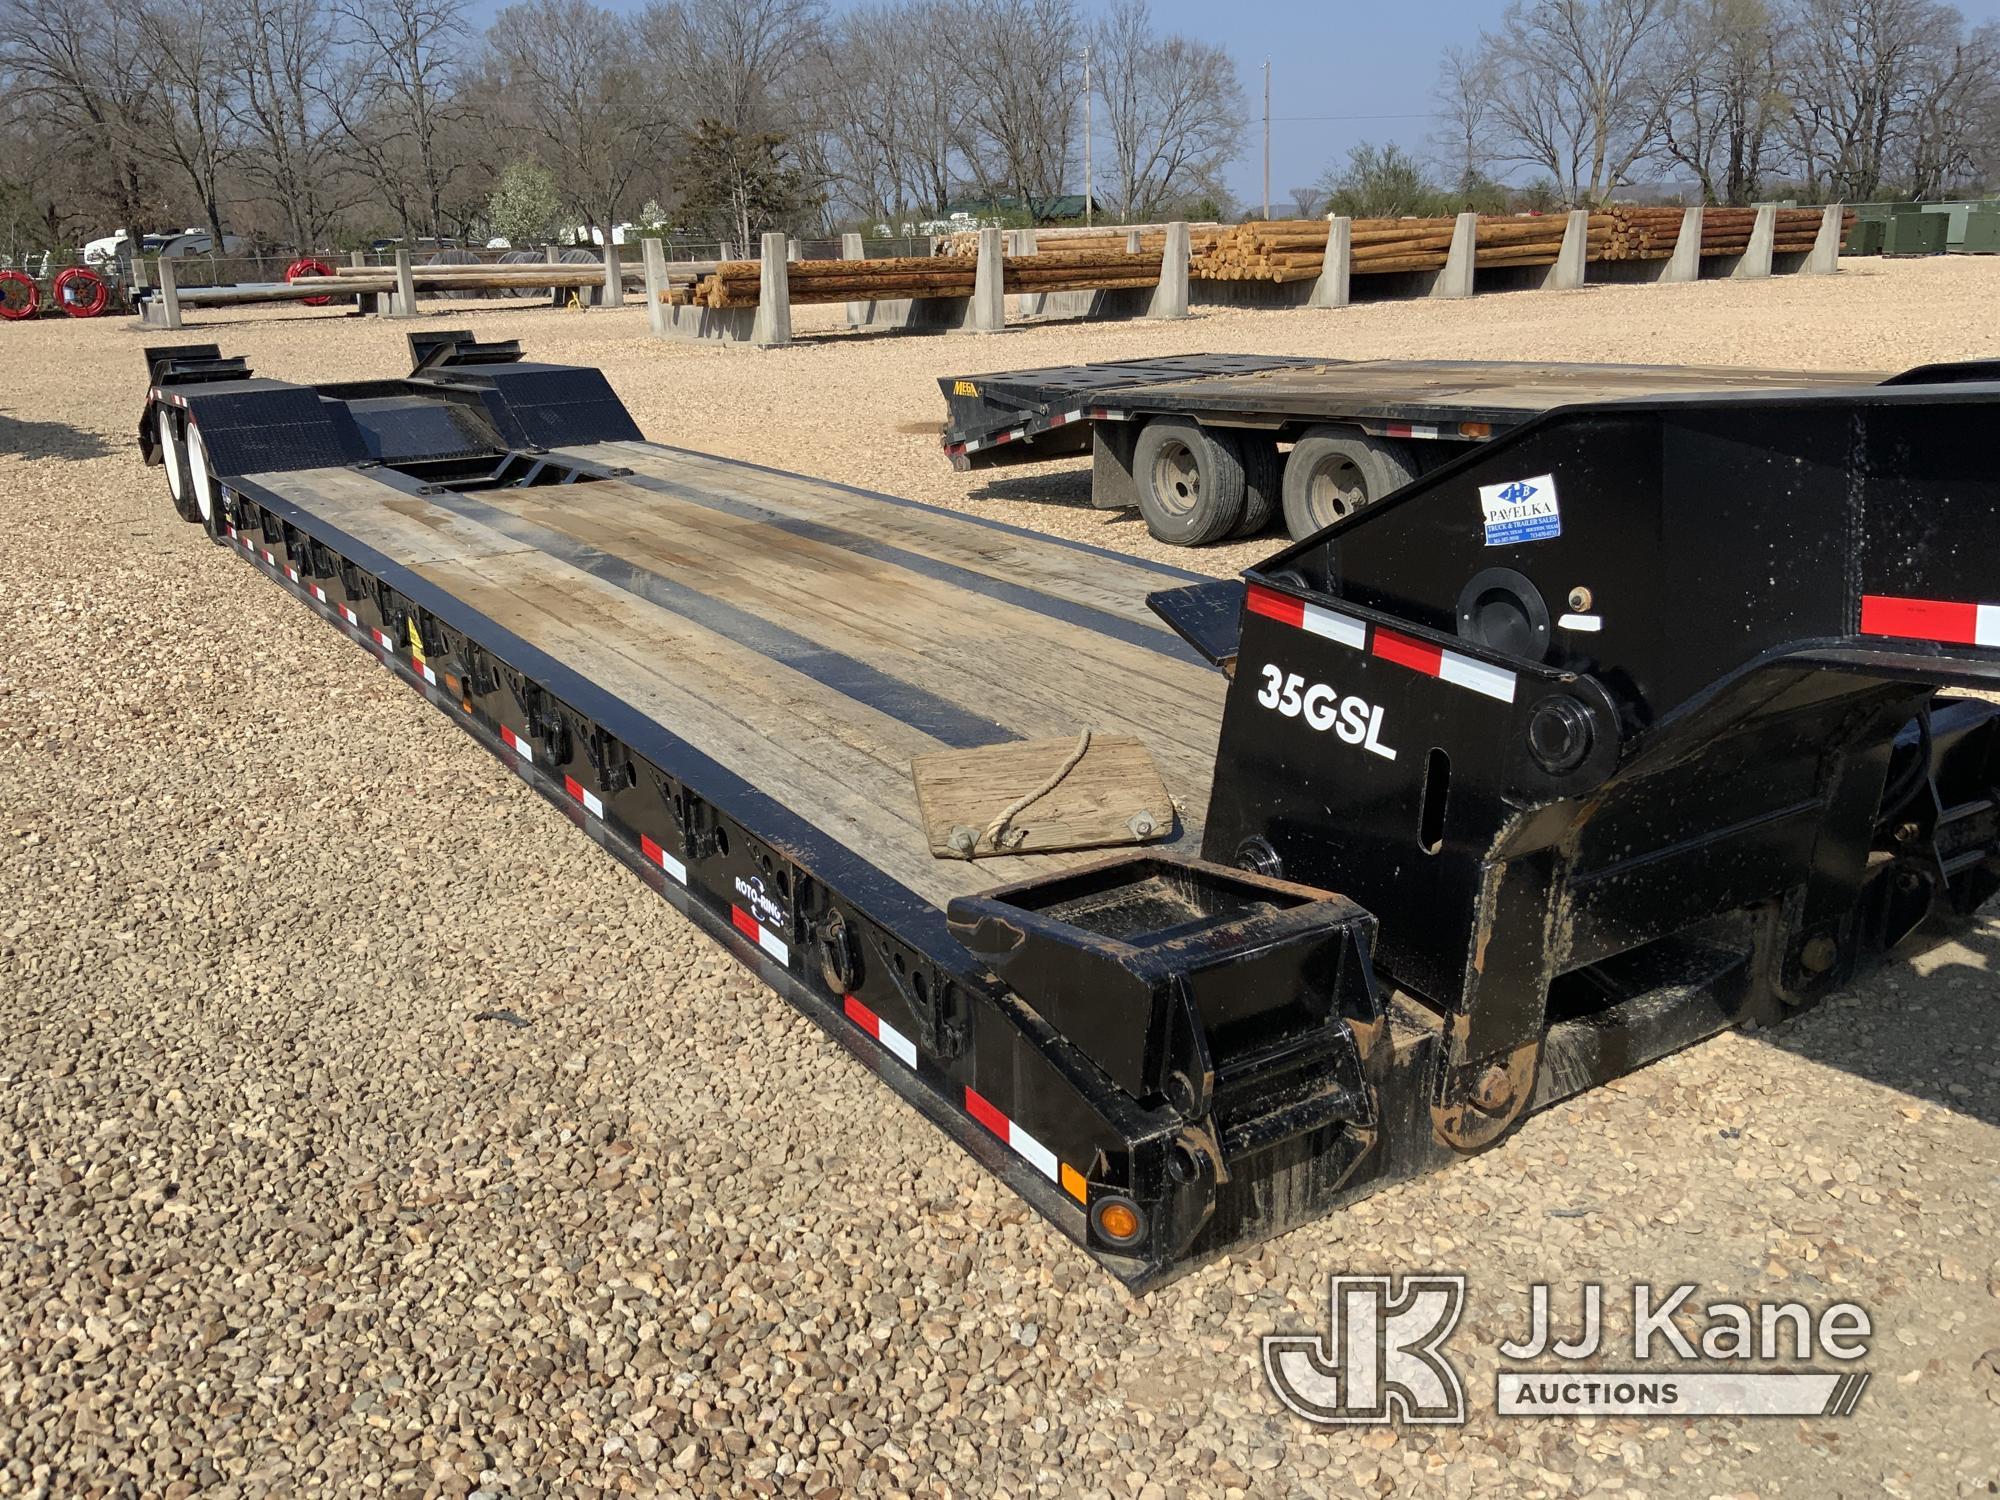 (Sallisaw, OK) 2013 Eager Beaver 35GSL T/A Lowboy Trailer, Cooperative Owned